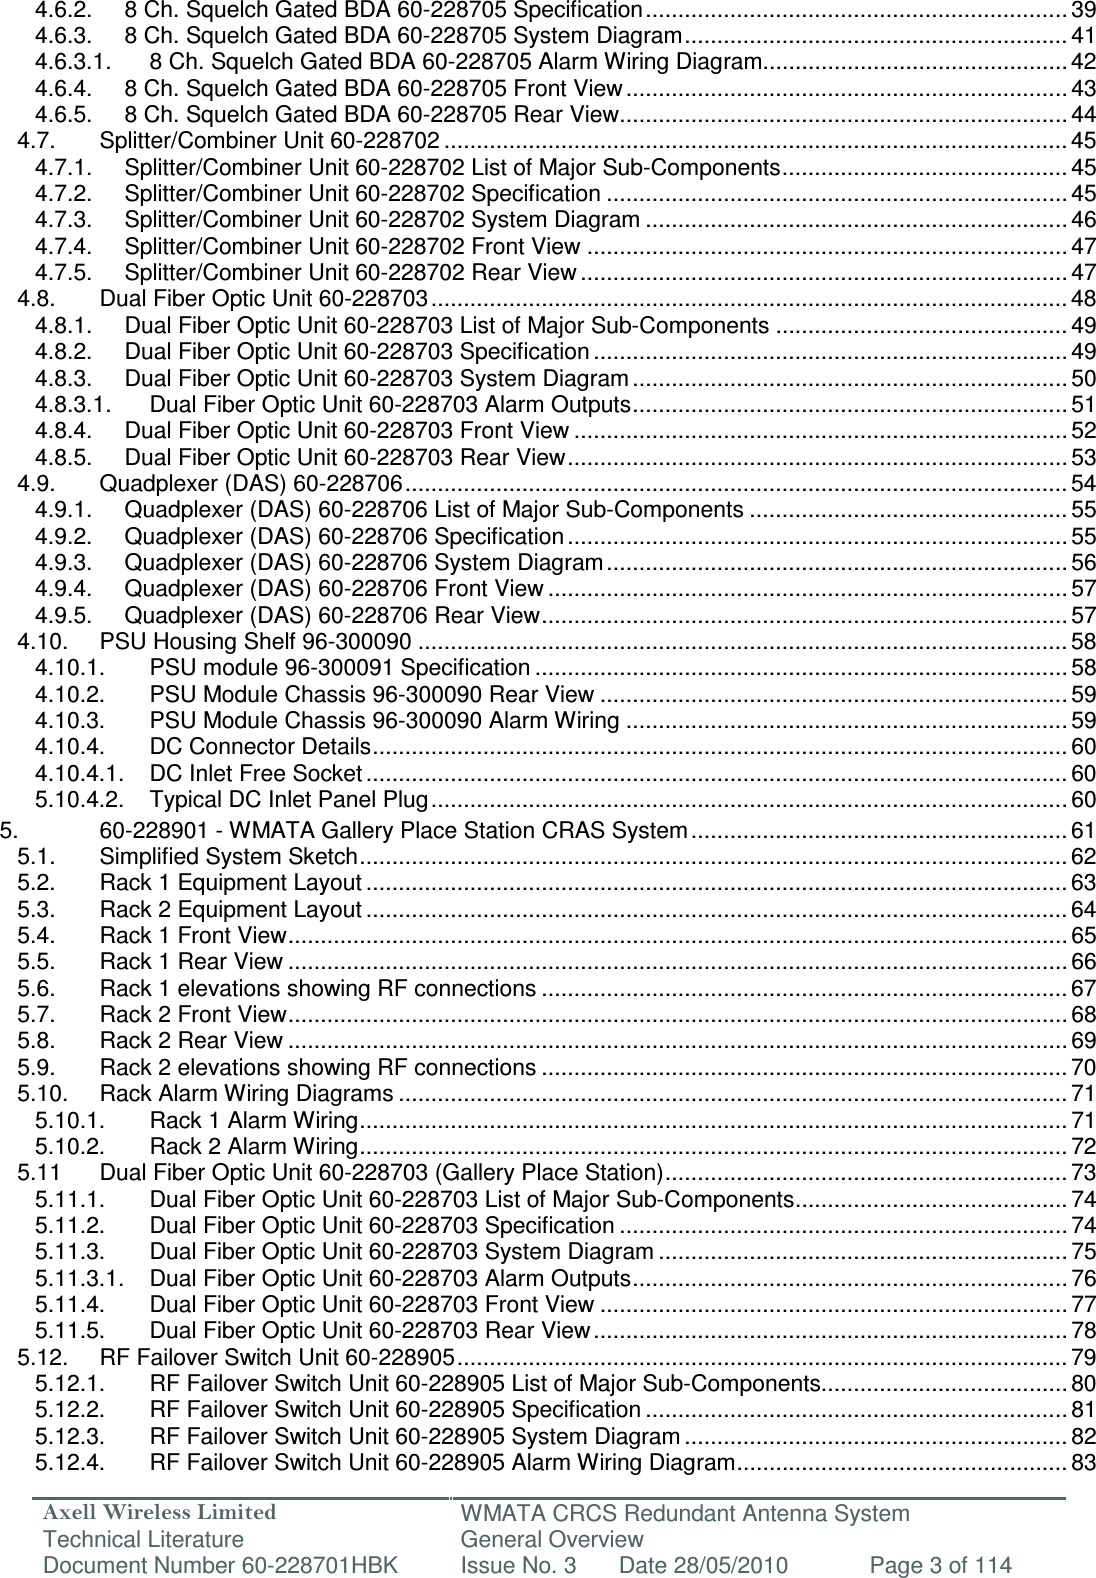 Axell Wireless Limited Technical Literature WMATA CRCS Redundant Antenna System General Overview Document Number 60-228701HBK  Issue No. 3  Date 28/05/2010  Page 3 of 114  4.6.2. 8 Ch. Squelch Gated BDA 60-228705 Specification ................................................................. 39 4.6.3. 8 Ch. Squelch Gated BDA 60-228705 System Diagram ........................................................... 41 4.6.3.1. 8 Ch. Squelch Gated BDA 60-228705 Alarm Wiring Diagram............................................... 42 4.6.4. 8 Ch. Squelch Gated BDA 60-228705 Front View .................................................................... 43 4.6.5. 8 Ch. Squelch Gated BDA 60-228705 Rear View ..................................................................... 44 4.7. Splitter/Combiner Unit 60-228702 ................................................................................................ 45 4.7.1. Splitter/Combiner Unit 60-228702 List of Major Sub-Components ............................................ 45 4.7.2. Splitter/Combiner Unit 60-228702 Specification ....................................................................... 45 4.7.3. Splitter/Combiner Unit 60-228702 System Diagram ................................................................. 46 4.7.4. Splitter/Combiner Unit 60-228702 Front View .......................................................................... 47 4.7.5. Splitter/Combiner Unit 60-228702 Rear View ........................................................................... 47 4.8. Dual Fiber Optic Unit 60-228703 .................................................................................................. 48 4.8.1. Dual Fiber Optic Unit 60-228703 List of Major Sub-Components ............................................. 49 4.8.2. Dual Fiber Optic Unit 60-228703 Specification ......................................................................... 49 4.8.3. Dual Fiber Optic Unit 60-228703 System Diagram ................................................................... 50 4.8.3.1. Dual Fiber Optic Unit 60-228703 Alarm Outputs ................................................................... 51 4.8.4. Dual Fiber Optic Unit 60-228703 Front View ............................................................................ 52 4.8.5. Dual Fiber Optic Unit 60-228703 Rear View ............................................................................. 53 4.9. Quadplexer (DAS) 60-228706 ...................................................................................................... 54 4.9.1. Quadplexer (DAS) 60-228706 List of Major Sub-Components ................................................. 55 4.9.2. Quadplexer (DAS) 60-228706 Specification ............................................................................. 55 4.9.3. Quadplexer (DAS) 60-228706 System Diagram ....................................................................... 56 4.9.4. Quadplexer (DAS) 60-228706 Front View ................................................................................ 57 4.9.5. Quadplexer (DAS) 60-228706 Rear View ................................................................................. 57 4.10. PSU Housing Shelf 96-300090 .................................................................................................... 58 4.10.1. PSU module 96-300091 Specification .................................................................................. 58 4.10.2. PSU Module Chassis 96-300090 Rear View ........................................................................ 59 4.10.3. PSU Module Chassis 96-300090 Alarm Wiring .................................................................... 59 4.10.4. DC Connector Details ........................................................................................................... 60 4.10.4.1. DC Inlet Free Socket ............................................................................................................ 60 5.10.4.2. Typical DC Inlet Panel Plug .................................................................................................. 60 5. 60-228901 - WMATA Gallery Place Station CRAS System .......................................................... 61 5.1. Simplified System Sketch ............................................................................................................. 62 5.2. Rack 1 Equipment Layout ............................................................................................................ 63 5.3. Rack 2 Equipment Layout ............................................................................................................ 64 5.4. Rack 1 Front View ........................................................................................................................ 65 5.5. Rack 1 Rear View ........................................................................................................................ 66 5.6. Rack 1 elevations showing RF connections ................................................................................. 67 5.7. Rack 2 Front View ........................................................................................................................ 68 5.8. Rack 2 Rear View ........................................................................................................................ 69 5.9. Rack 2 elevations showing RF connections ................................................................................. 70 5.10. Rack Alarm Wiring Diagrams ....................................................................................................... 71 5.10.1. Rack 1 Alarm Wiring ............................................................................................................. 71 5.10.2. Rack 2 Alarm Wiring ............................................................................................................. 72 5.11 Dual Fiber Optic Unit 60-228703 (Gallery Place Station) .............................................................. 73 5.11.1. Dual Fiber Optic Unit 60-228703 List of Major Sub-Components .......................................... 74 5.11.2. Dual Fiber Optic Unit 60-228703 Specification ..................................................................... 74 5.11.3. Dual Fiber Optic Unit 60-228703 System Diagram ............................................................... 75 5.11.3.1. Dual Fiber Optic Unit 60-228703 Alarm Outputs ................................................................... 76 5.11.4. Dual Fiber Optic Unit 60-228703 Front View ........................................................................ 77 5.11.5. Dual Fiber Optic Unit 60-228703 Rear View ......................................................................... 78 5.12. RF Failover Switch Unit 60-228905 .............................................................................................. 79 5.12.1. RF Failover Switch Unit 60-228905 List of Major Sub-Components...................................... 80 5.12.2. RF Failover Switch Unit 60-228905 Specification ................................................................. 81 5.12.3. RF Failover Switch Unit 60-228905 System Diagram ........................................................... 82 5.12.4. RF Failover Switch Unit 60-228905 Alarm Wiring Diagram ................................................... 83 